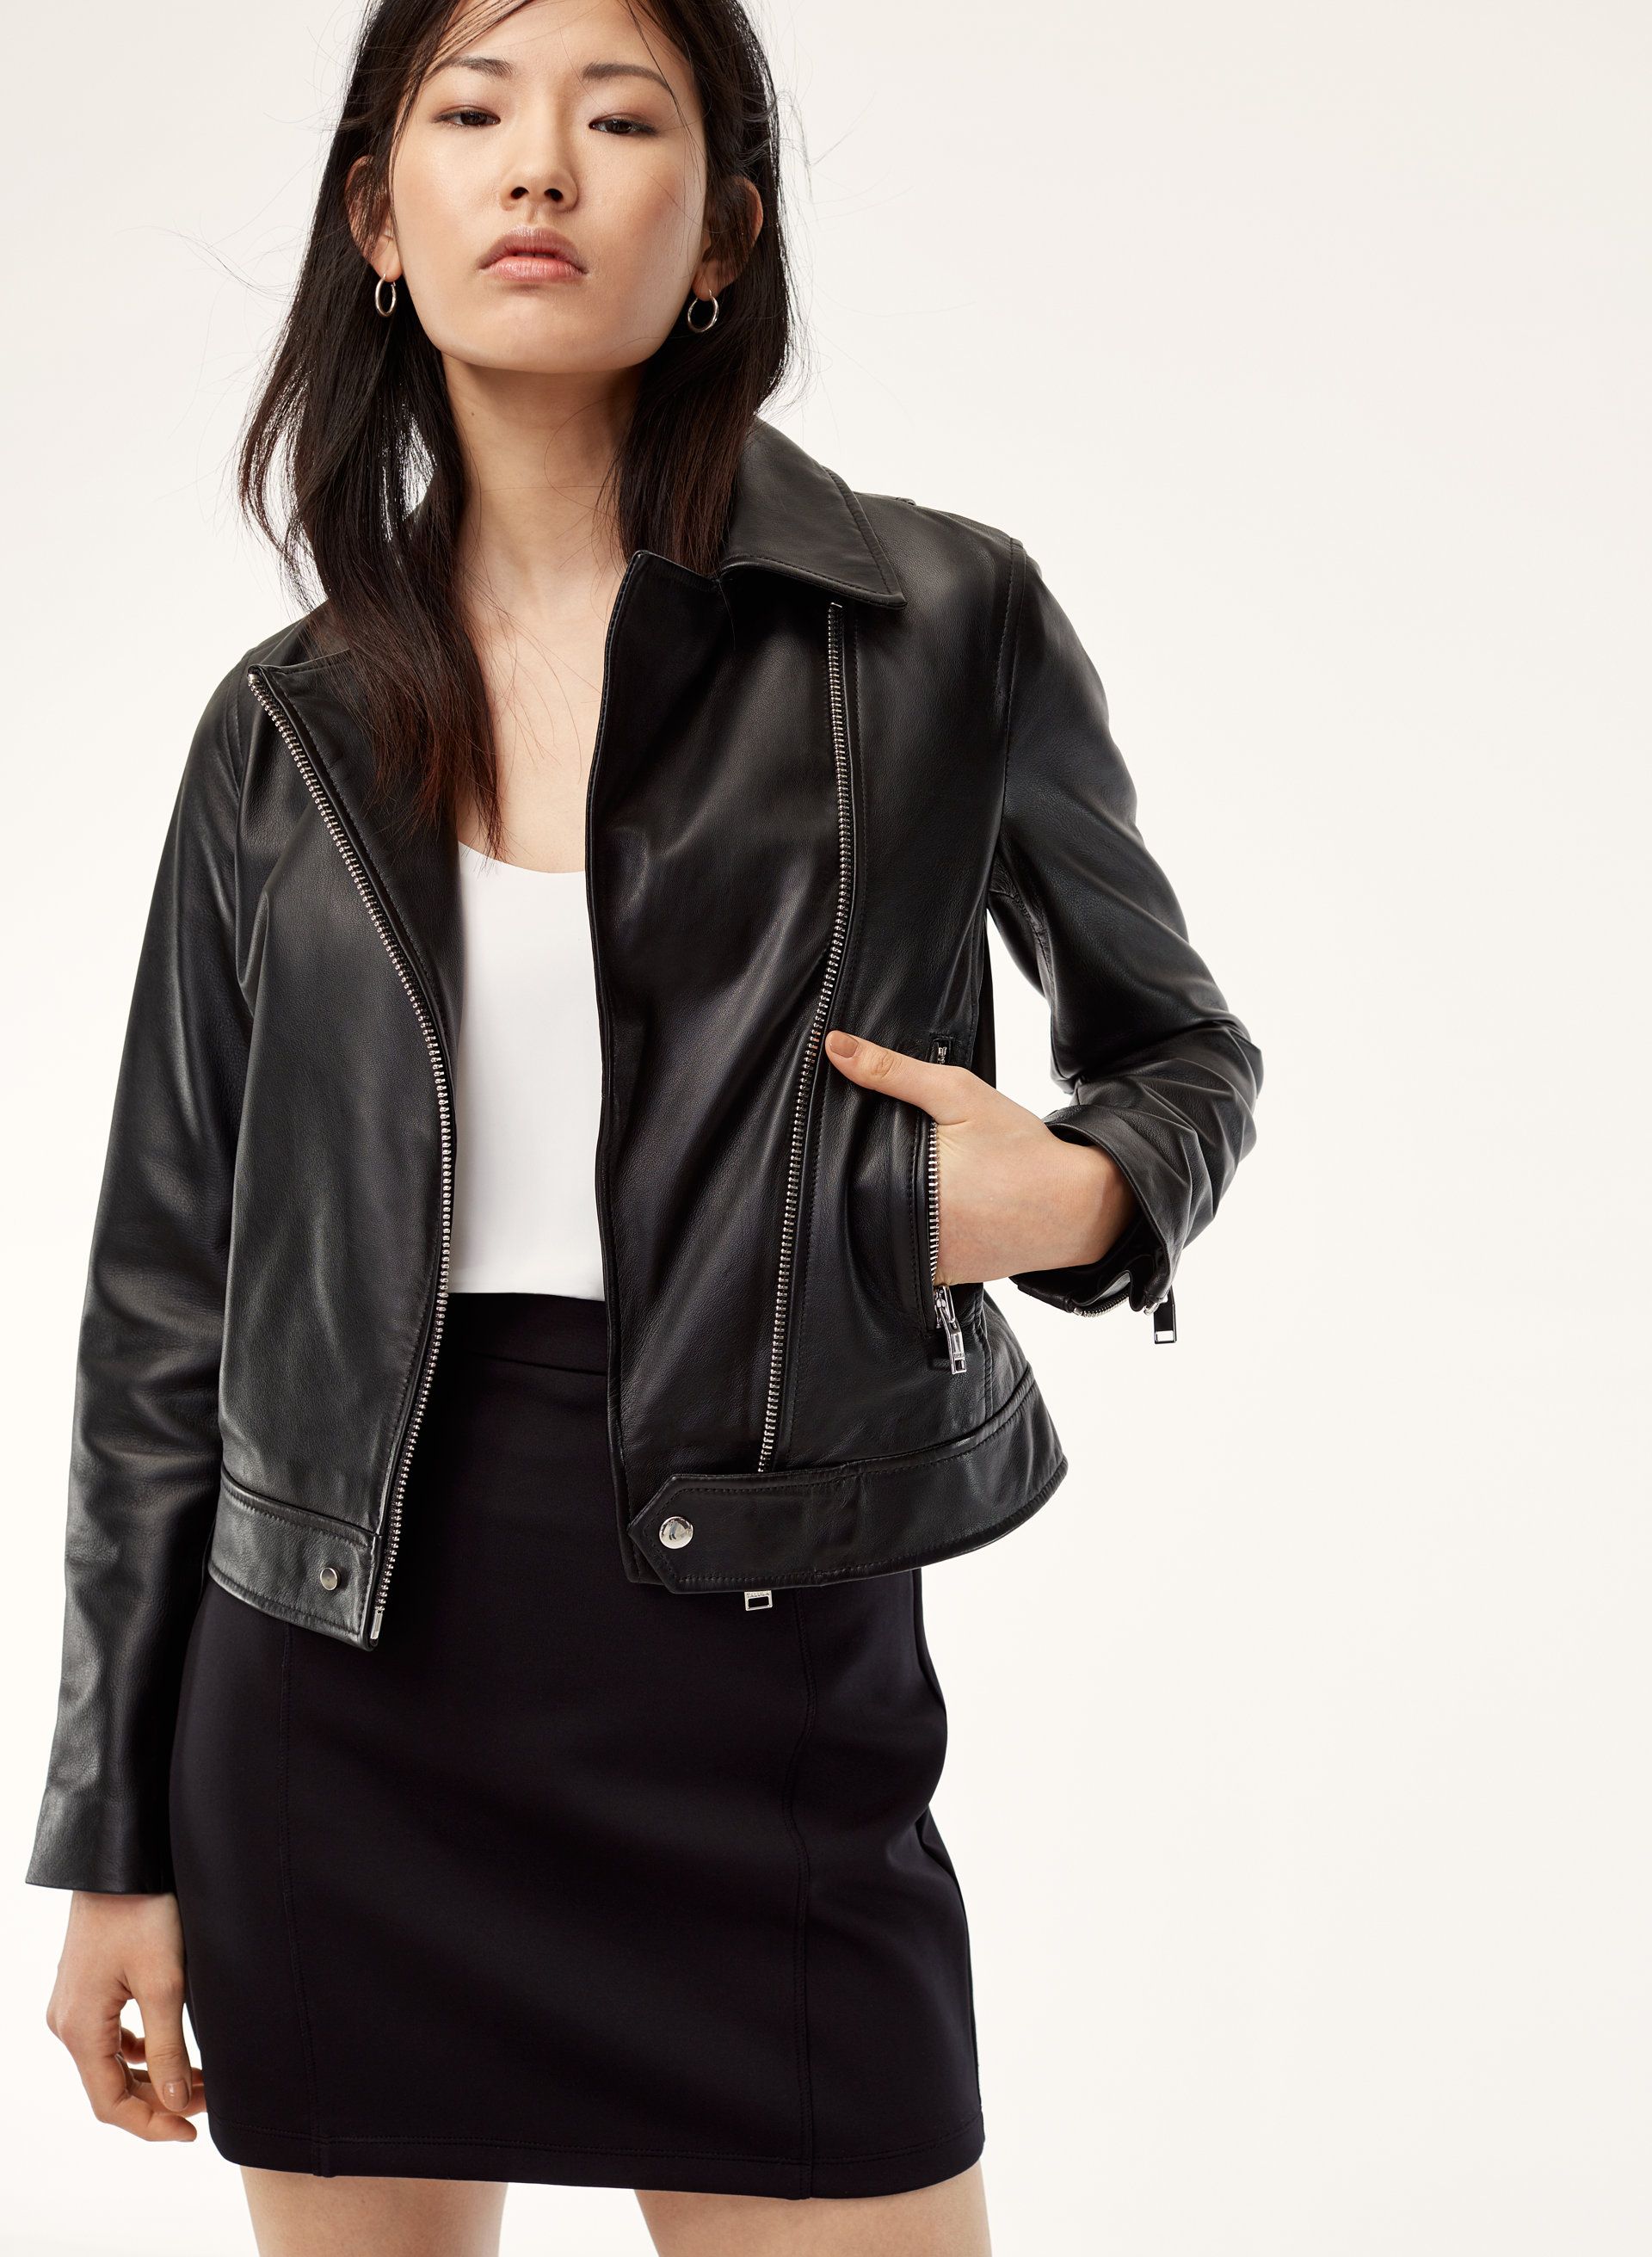 In The Market For A New Leather Jacket? Aritzia's Got You | Oye! Times